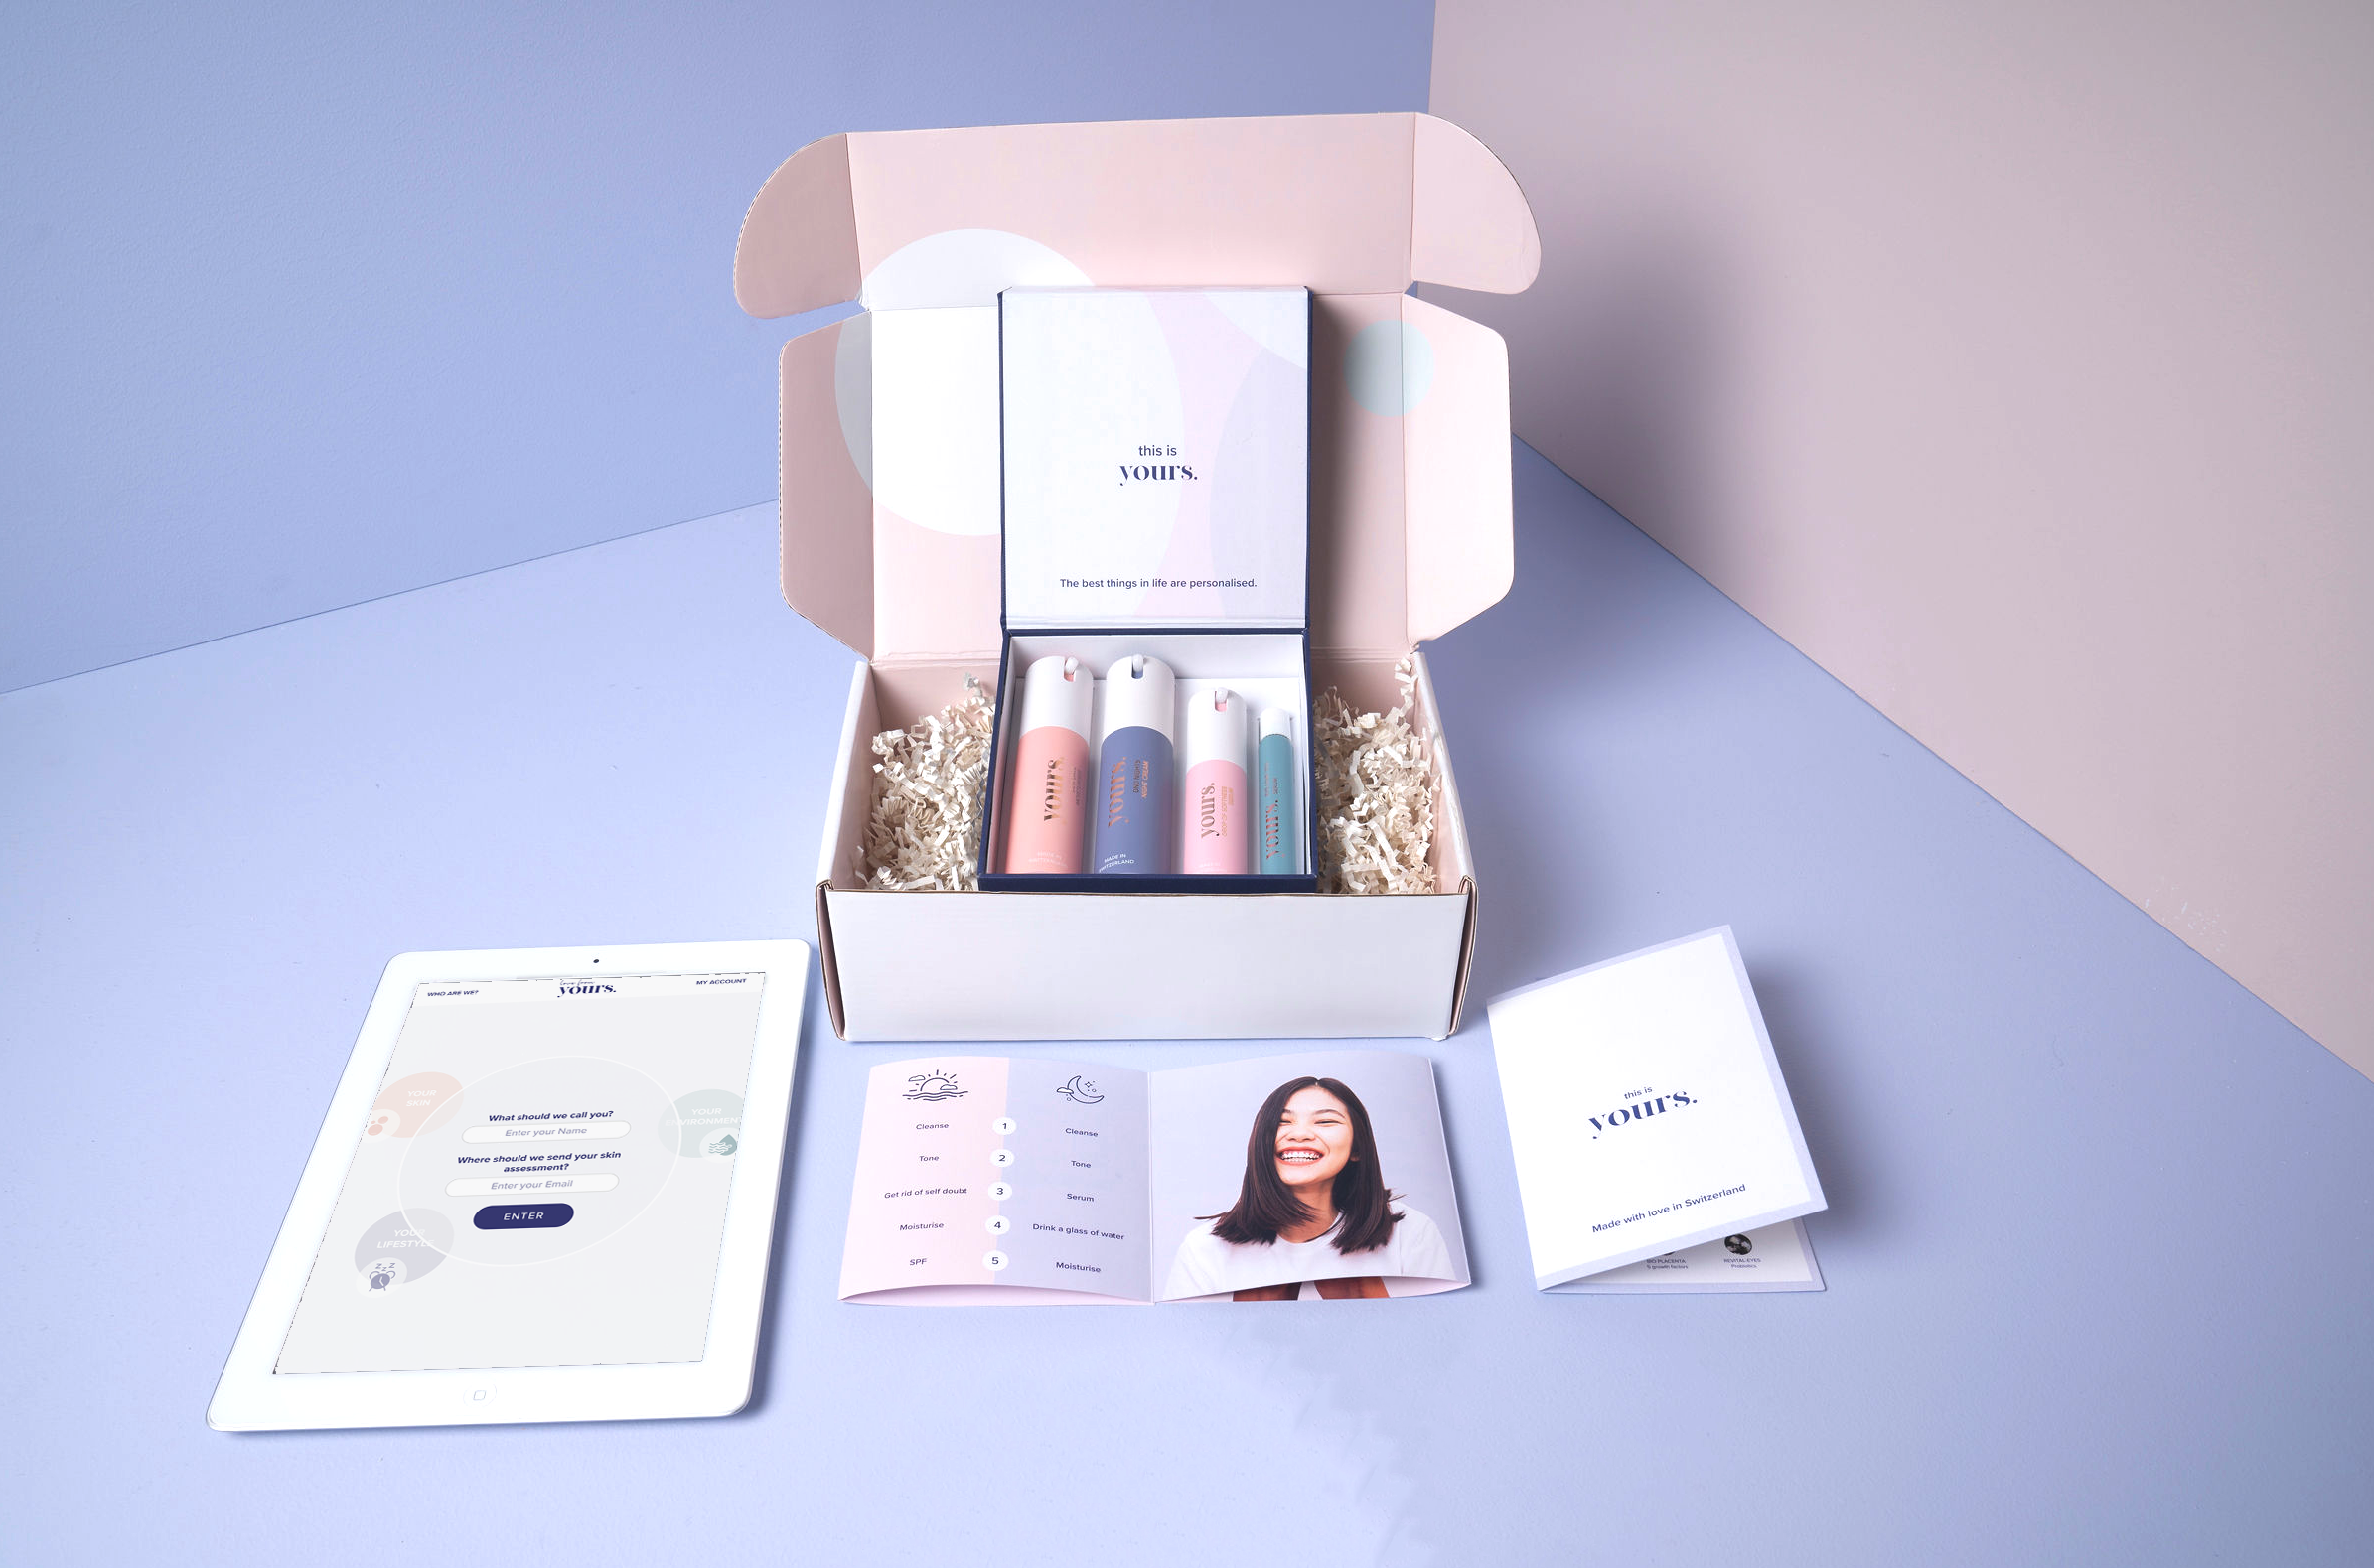 Sequoia-backed beauty tech startup Yours raises USD 3.5 million seed round